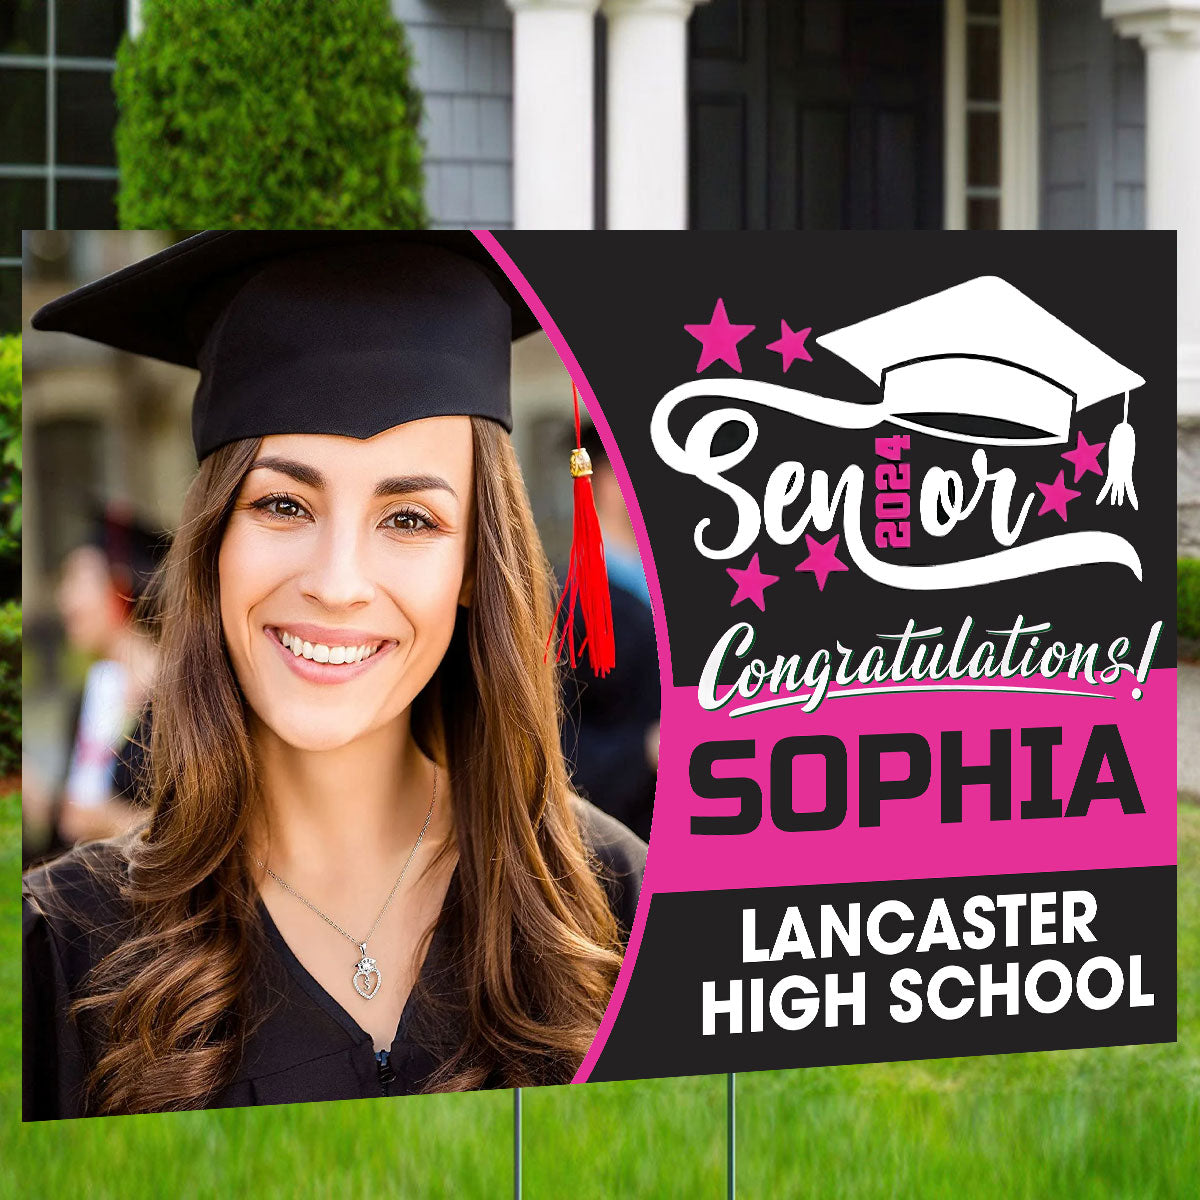 Senior 2024 Congratulations, Custom Photo, School Name And Your Name, Personalized Lawn Sign, Yard Sign, Gift For Graduation